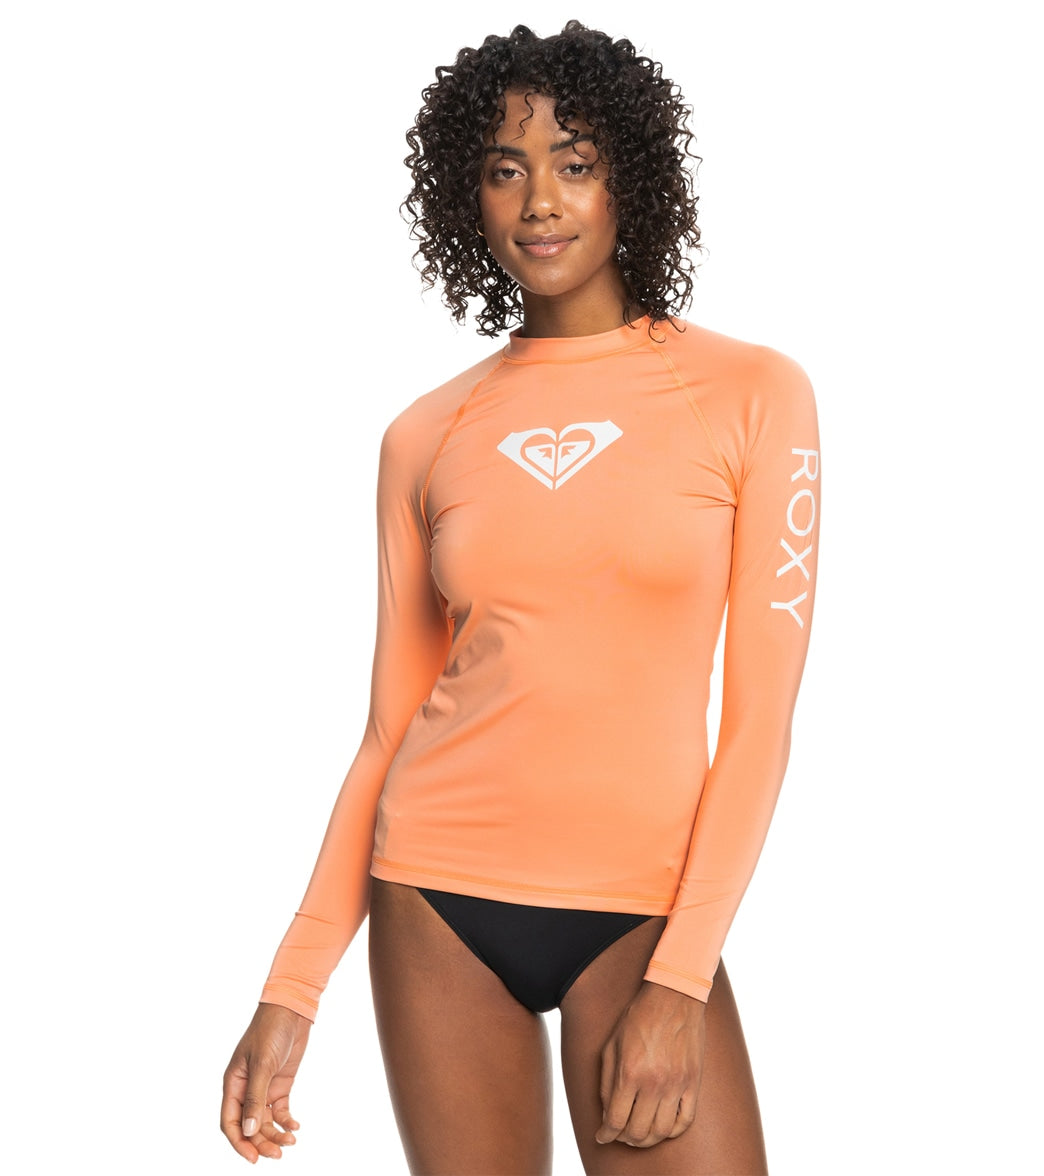 Station overschot Bederven Roxy Women's Whole Hearted Long Sleeve UPF 50 Rash Guard at SwimOutlet.com